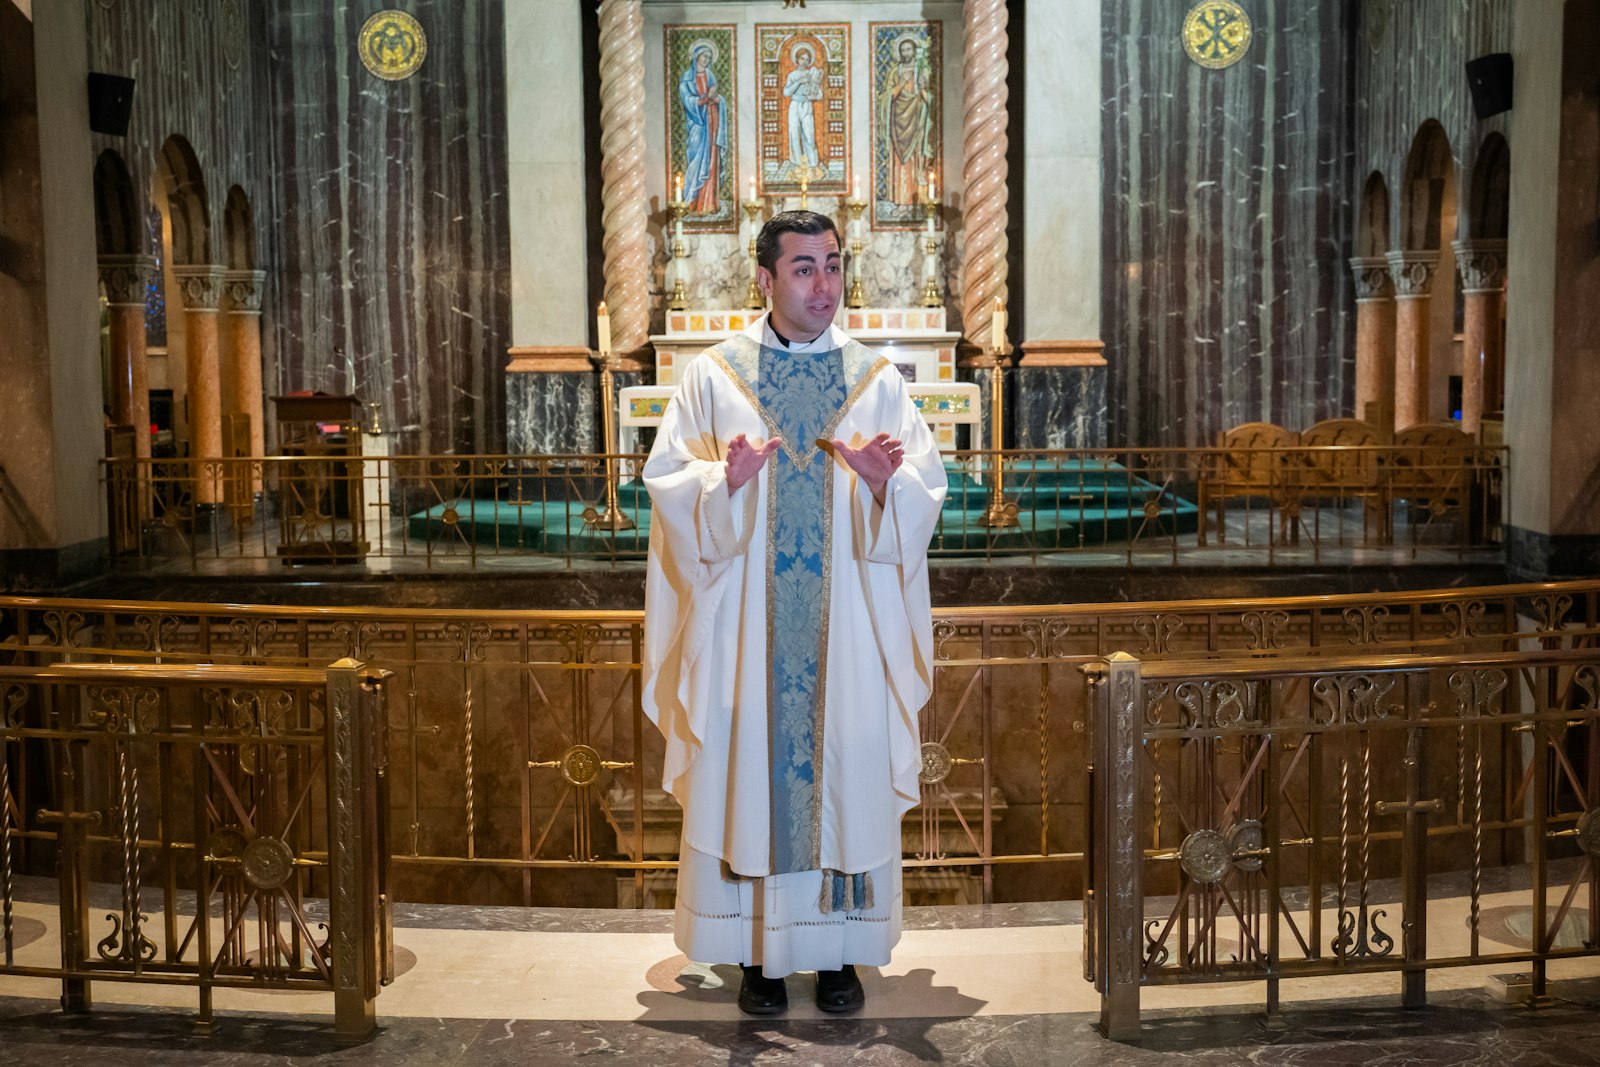 During his time as pastor of St. Aloysius, Fr. Amore said he and the parish staff relied on the Curia to connect the parish’s mission with that of the archbishop, utilizing the full resources of the archdiocese to make the parish a true field hospital of mercy in the community, as Pope Francis described the role of the church.